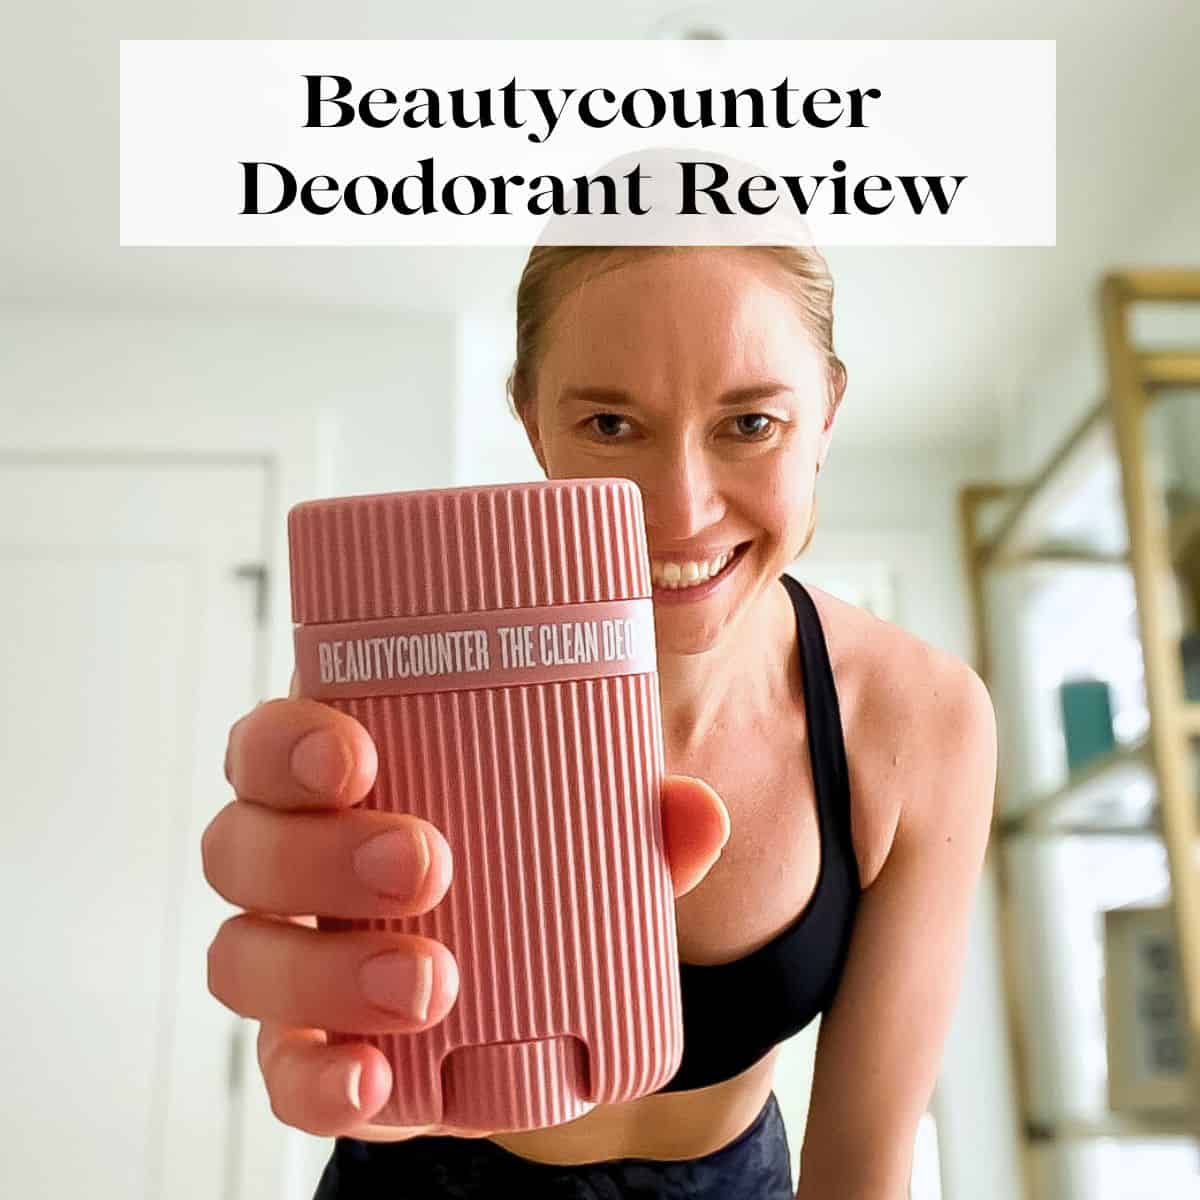 A girl holding a tube of Beautycounter deodorant with the title "Beautycounter deodorant review" over her.